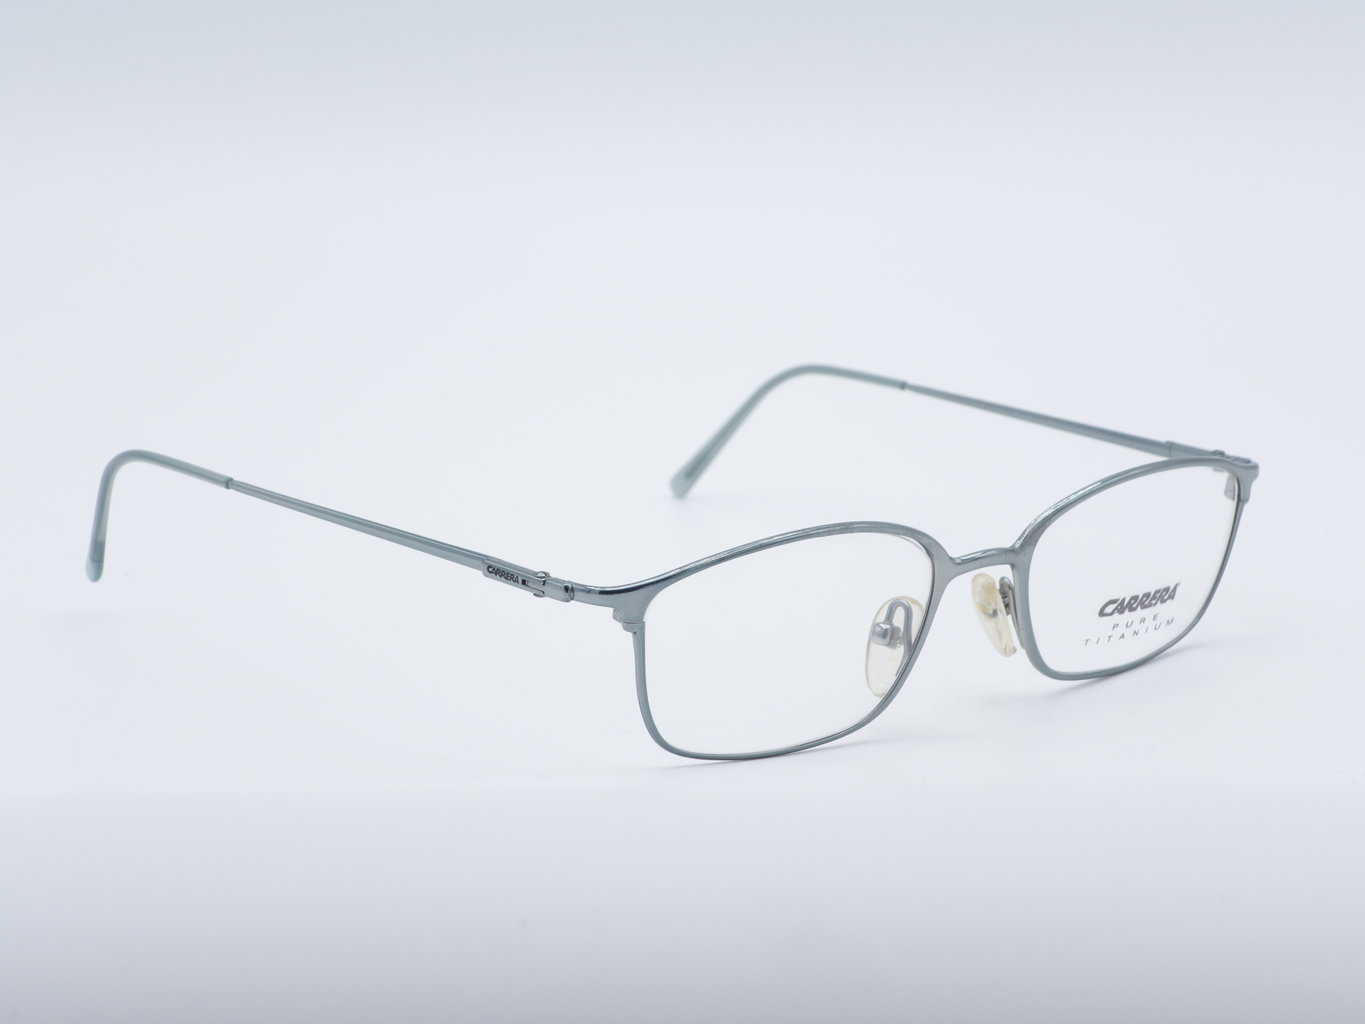 Carrera men's glasses model 7170 made of light and durable titanium in  silver-grey and with spring temples | GrauGlasses vintage eyewear